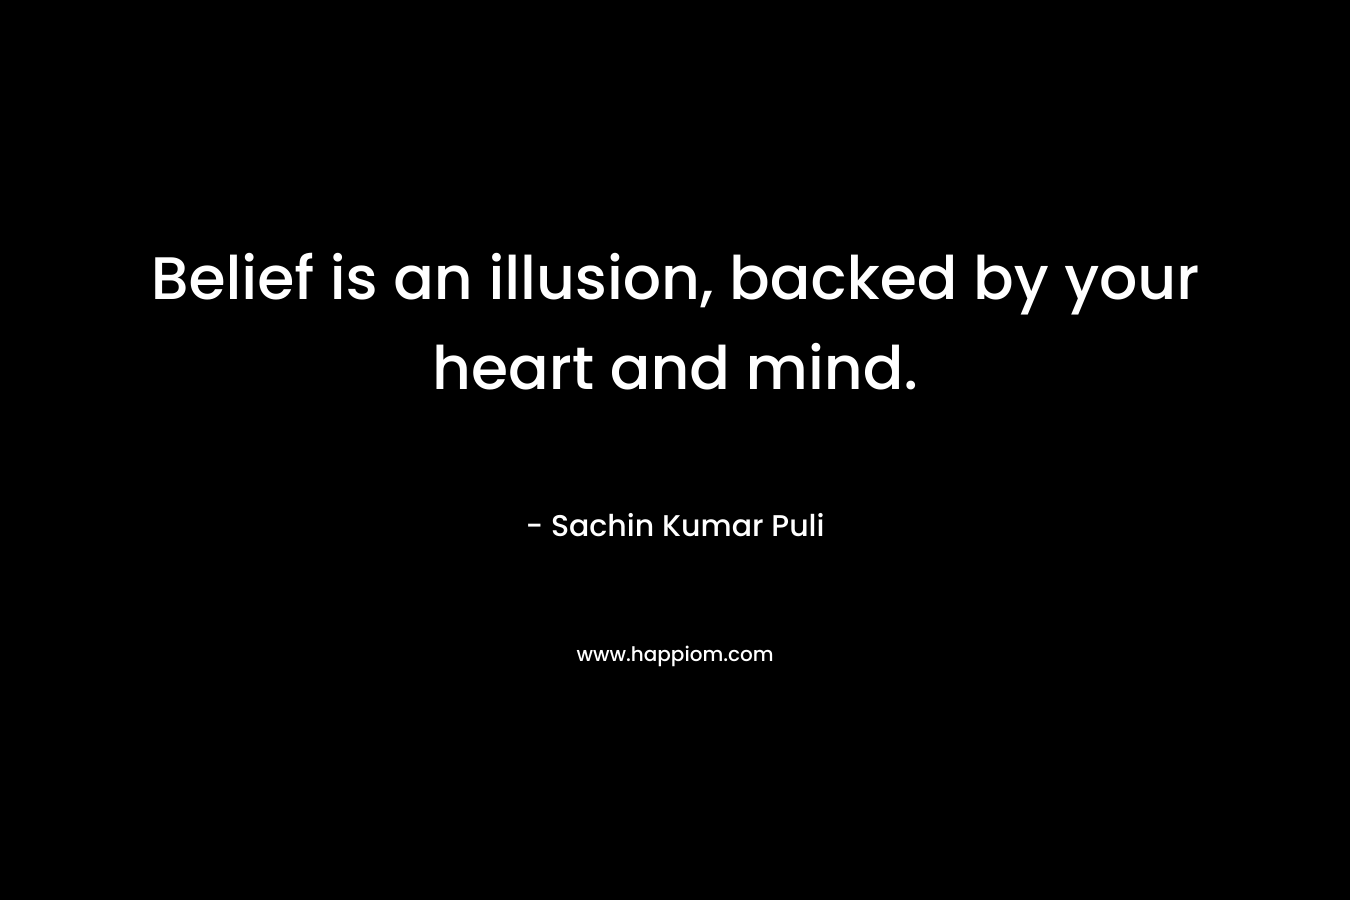 Belief is an illusion, backed by your heart and mind.